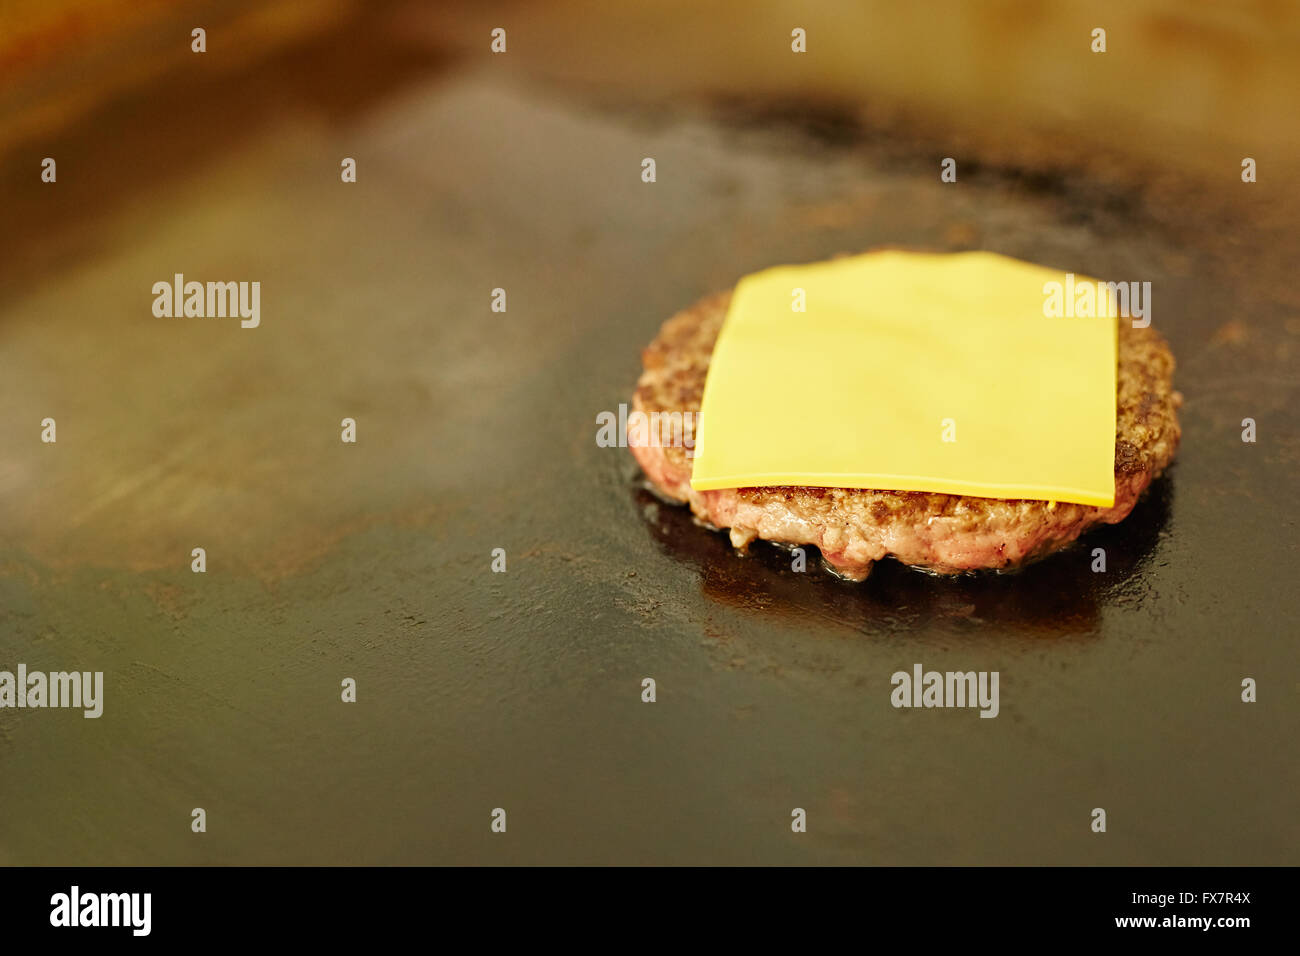 Hamburger patty frying on a grill with fresh cheese Stock Photo